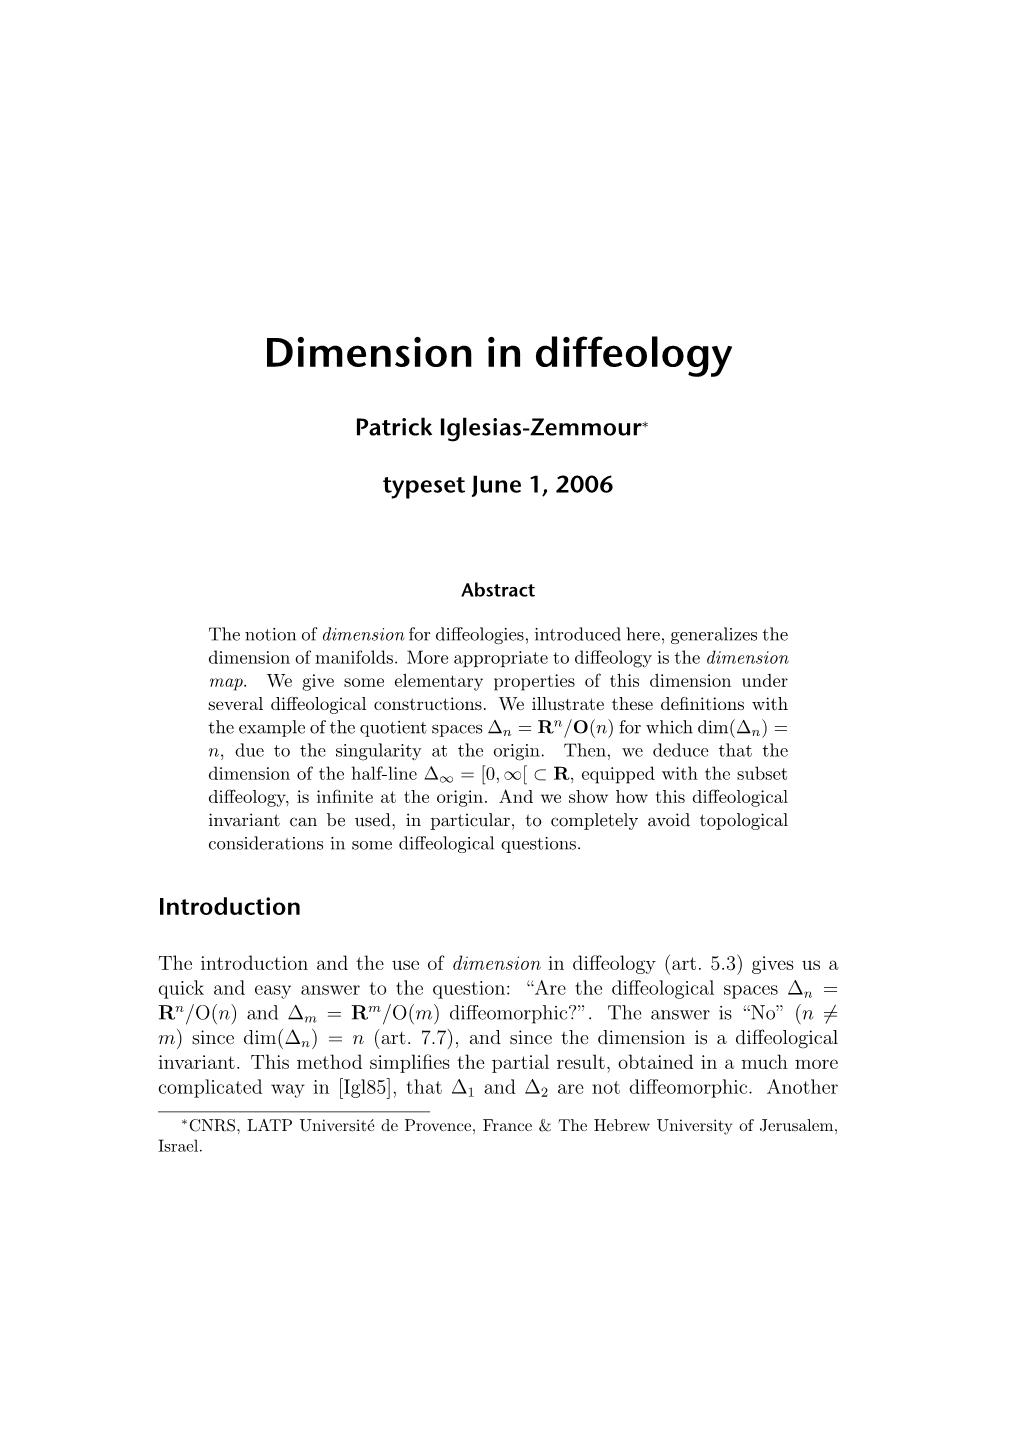 Dimension in Diffeology